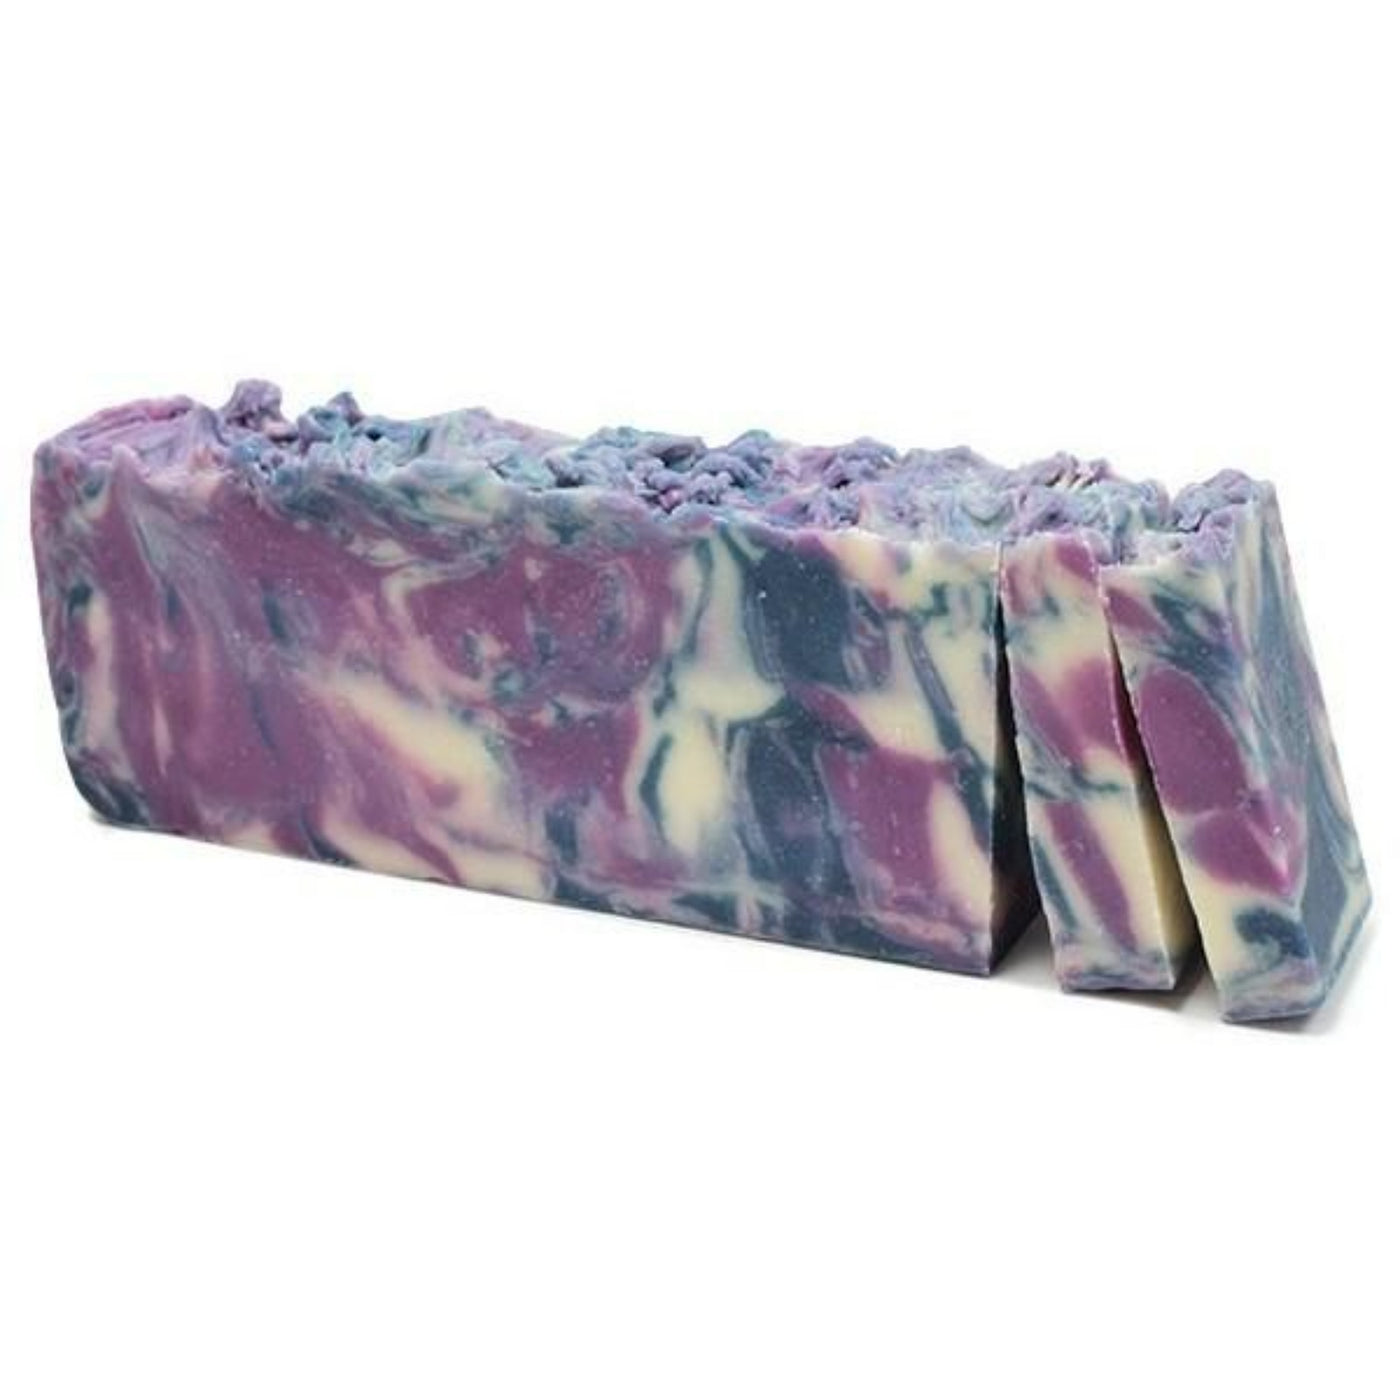 Herb of Grace Paraben Free Olive Oil Body Soap Loaf And Soap Slices.